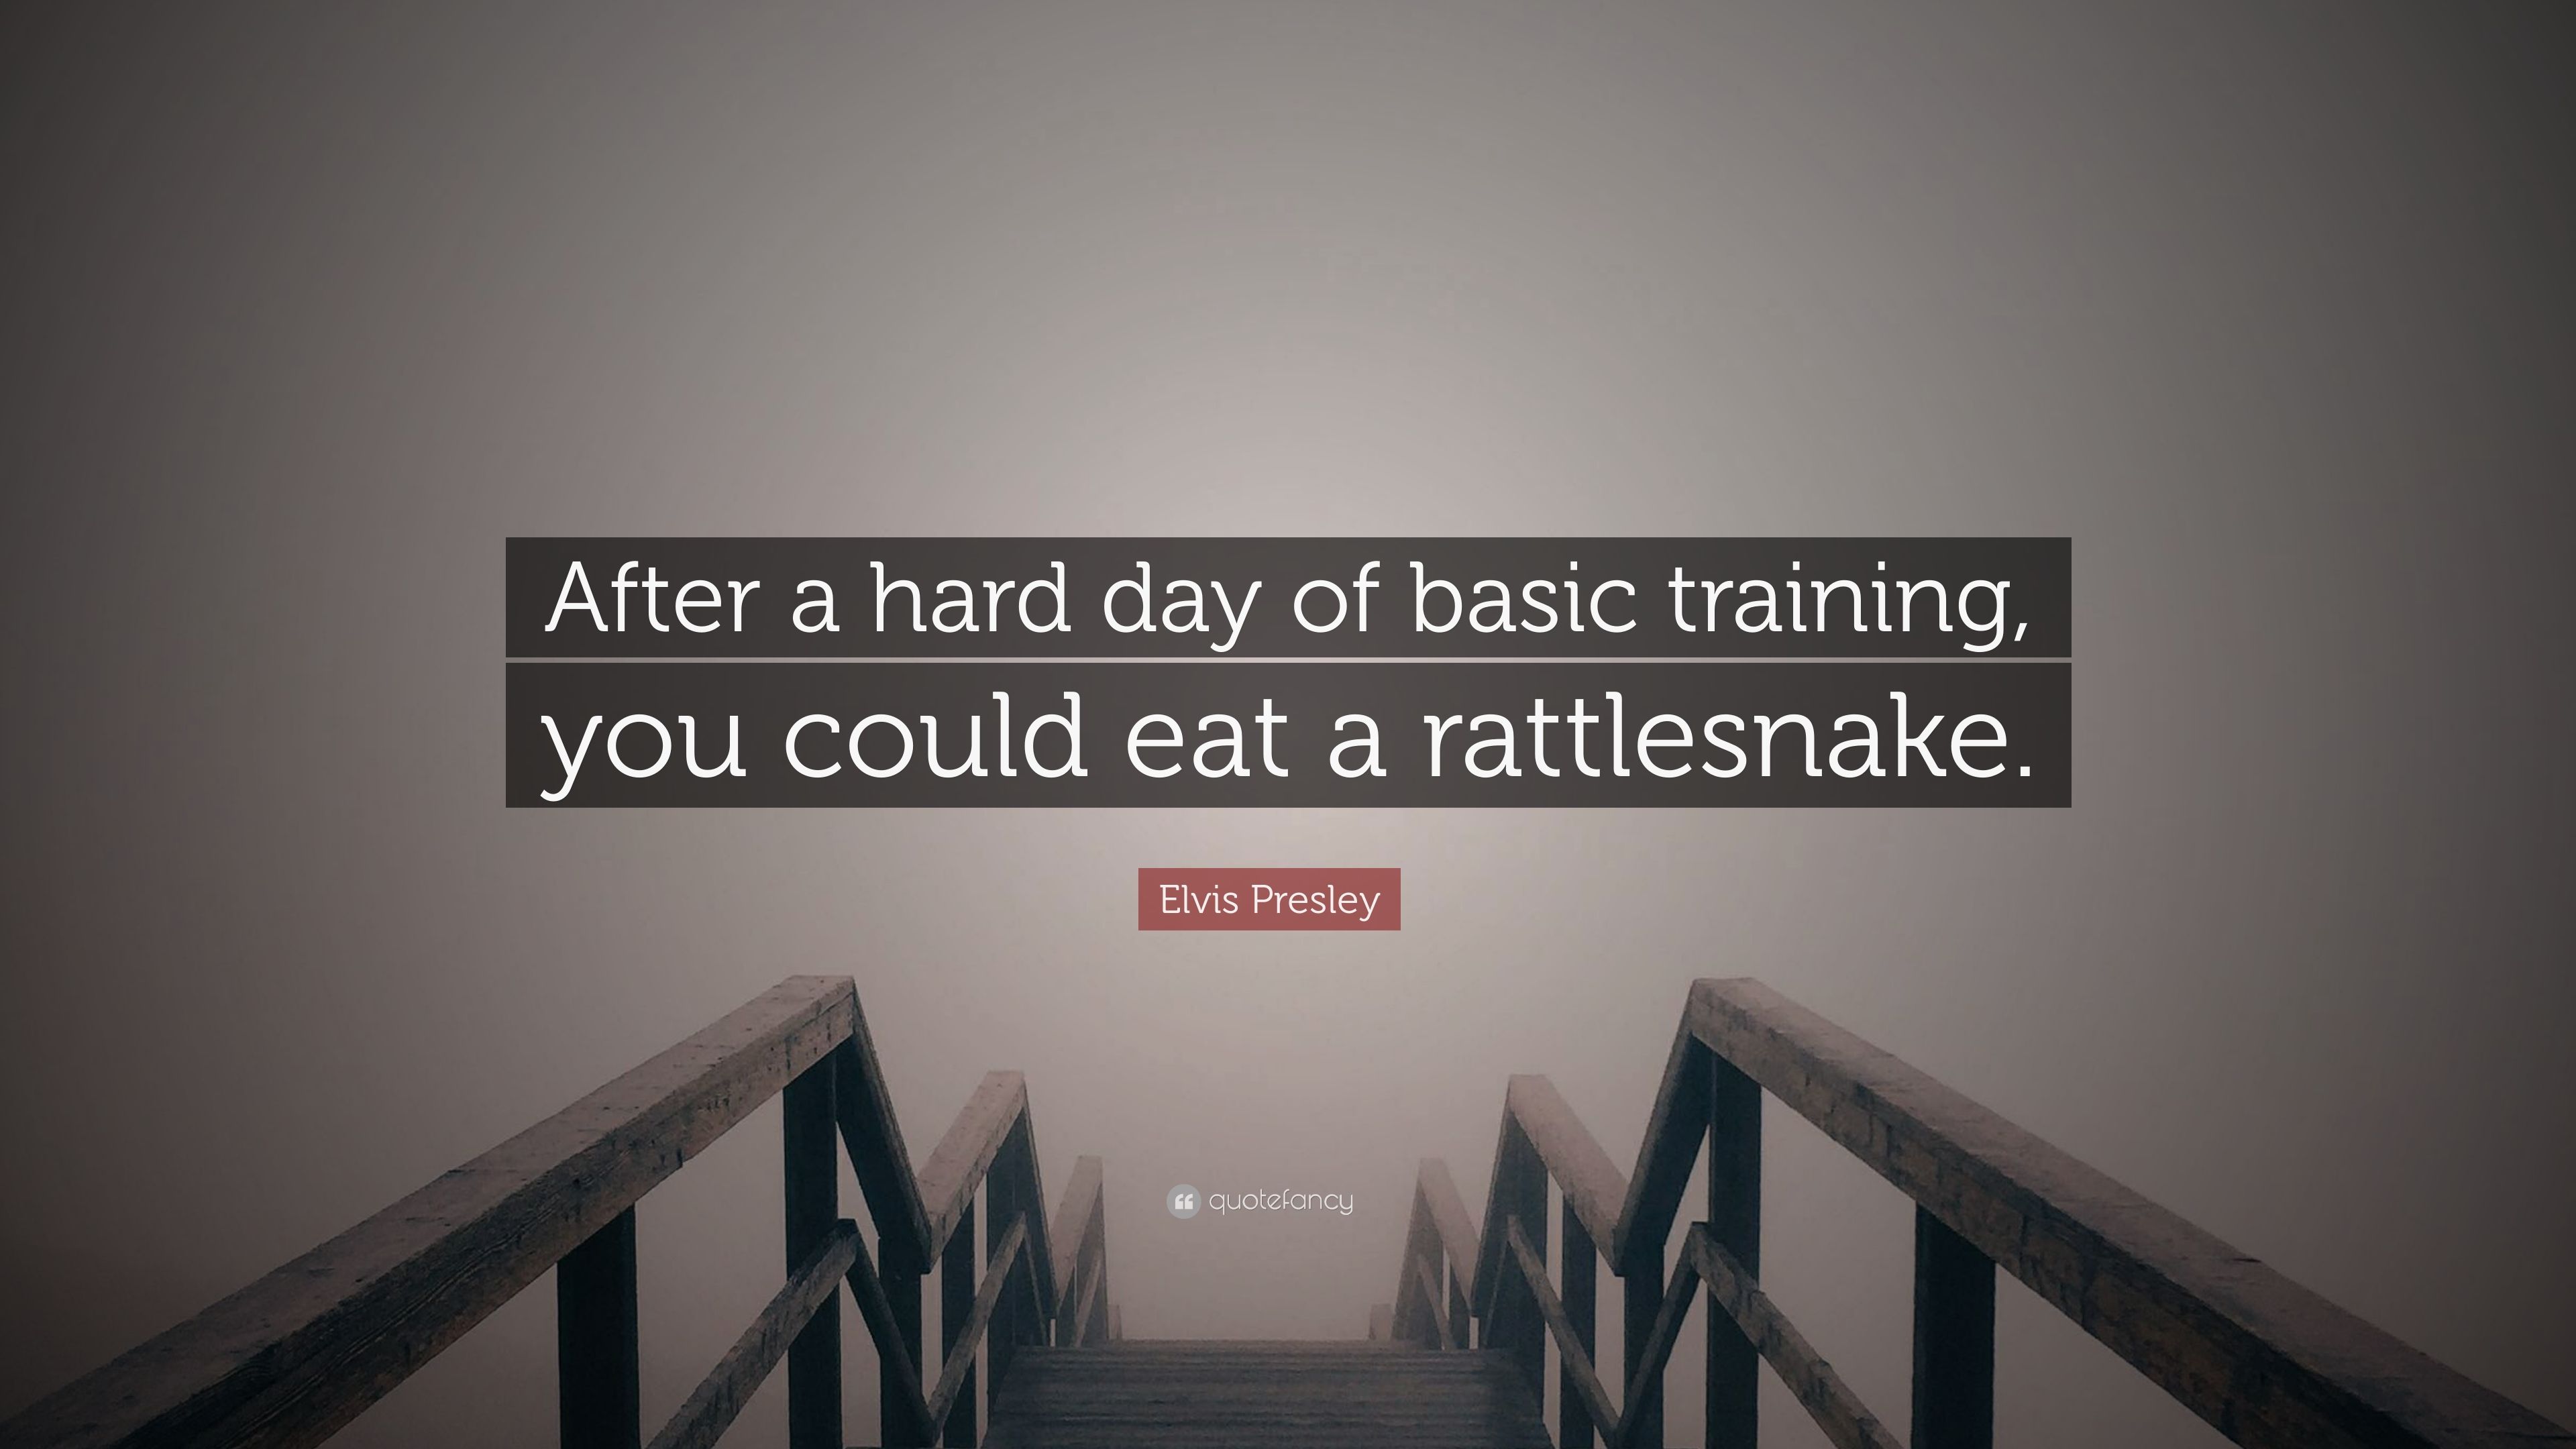 Elvis Presley Quote: “After a hard day of basic training, you